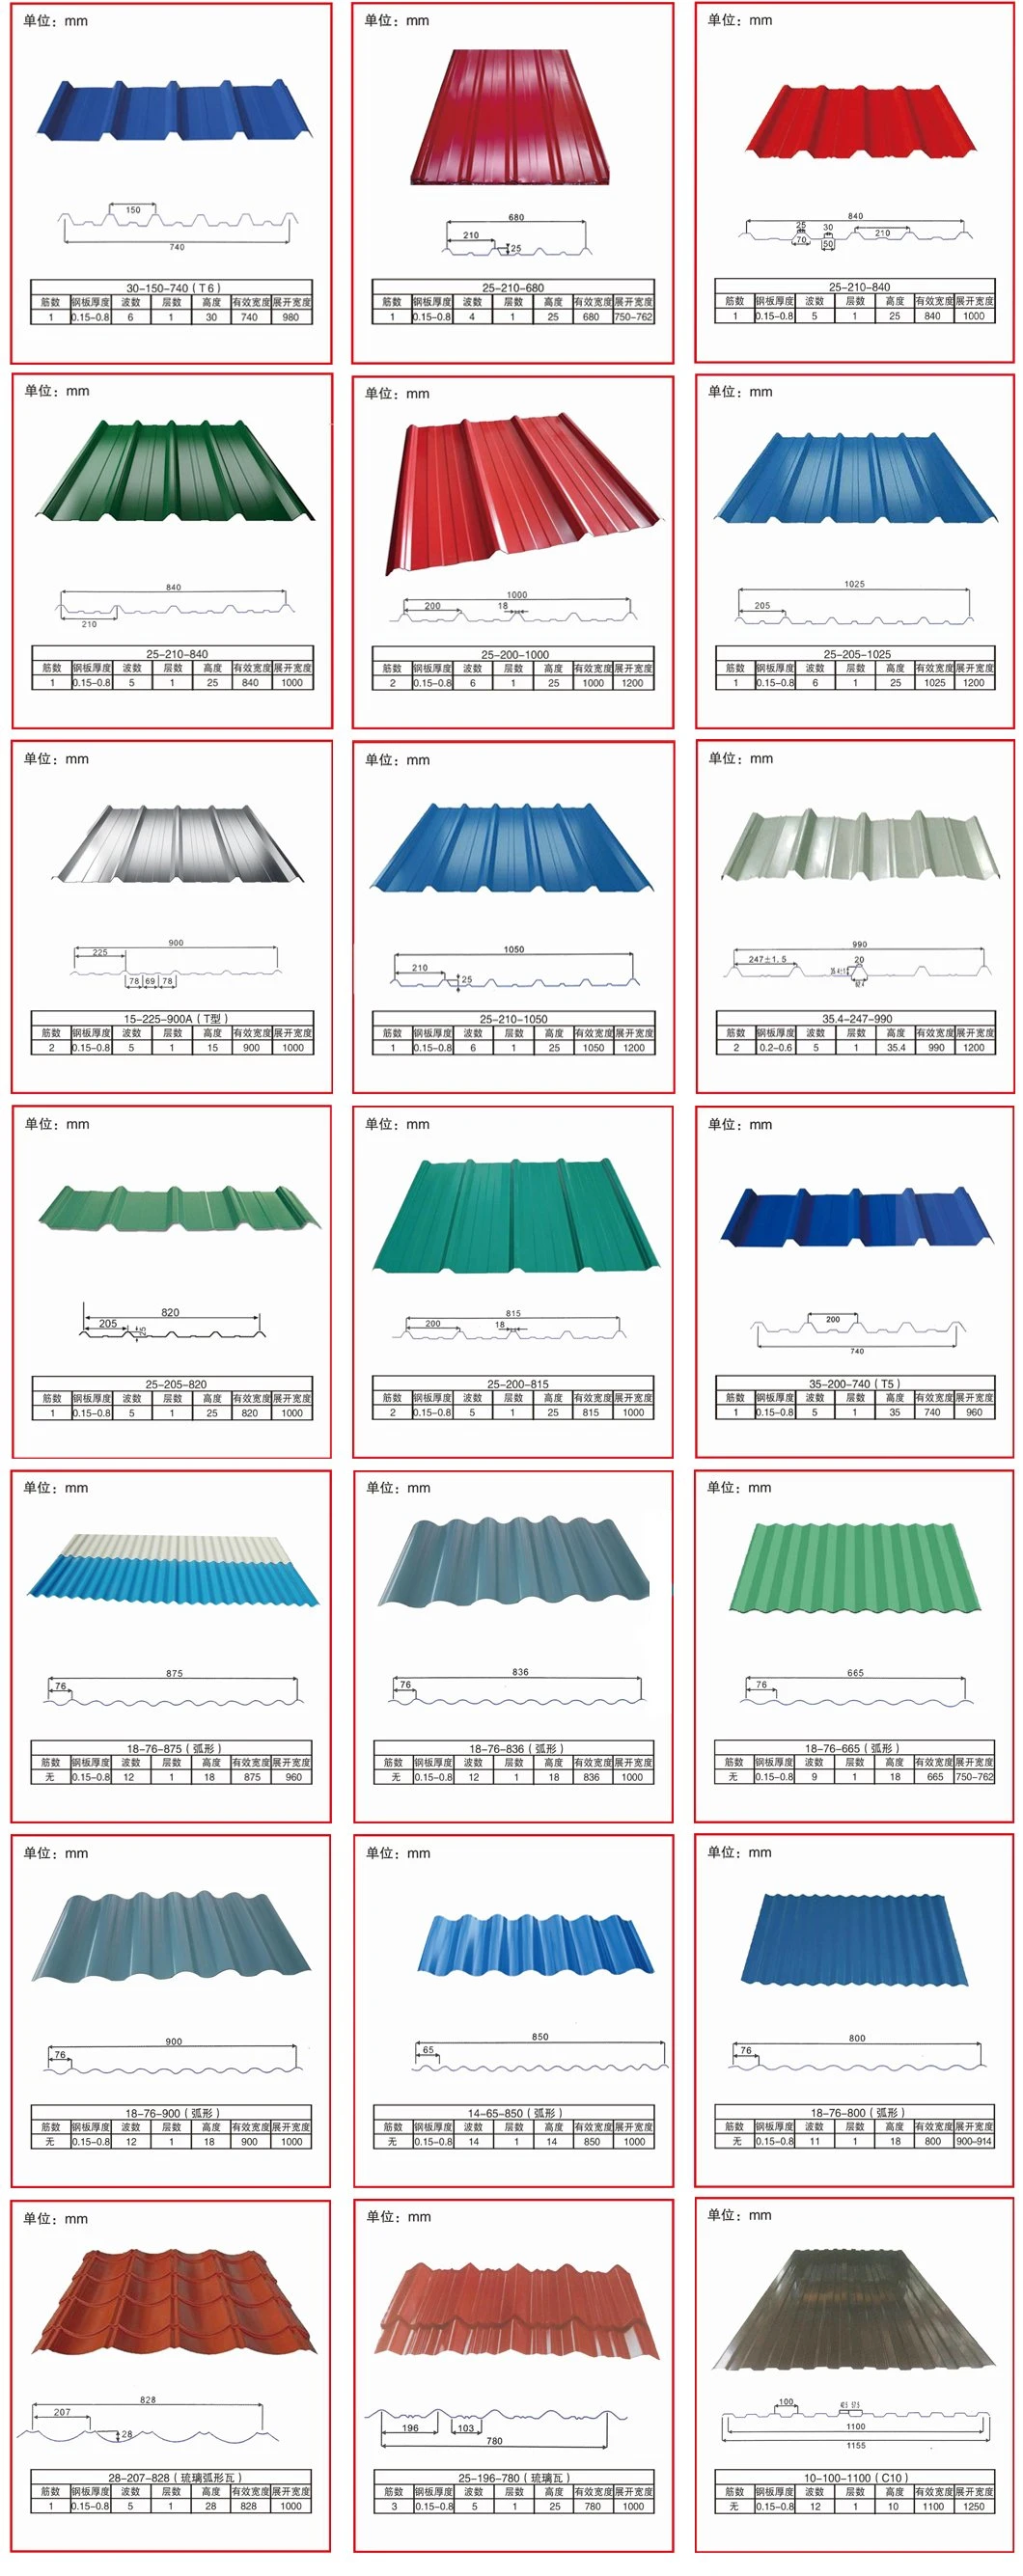 Prepainted Galvanized Corrugated Sheet Roofing Sheet